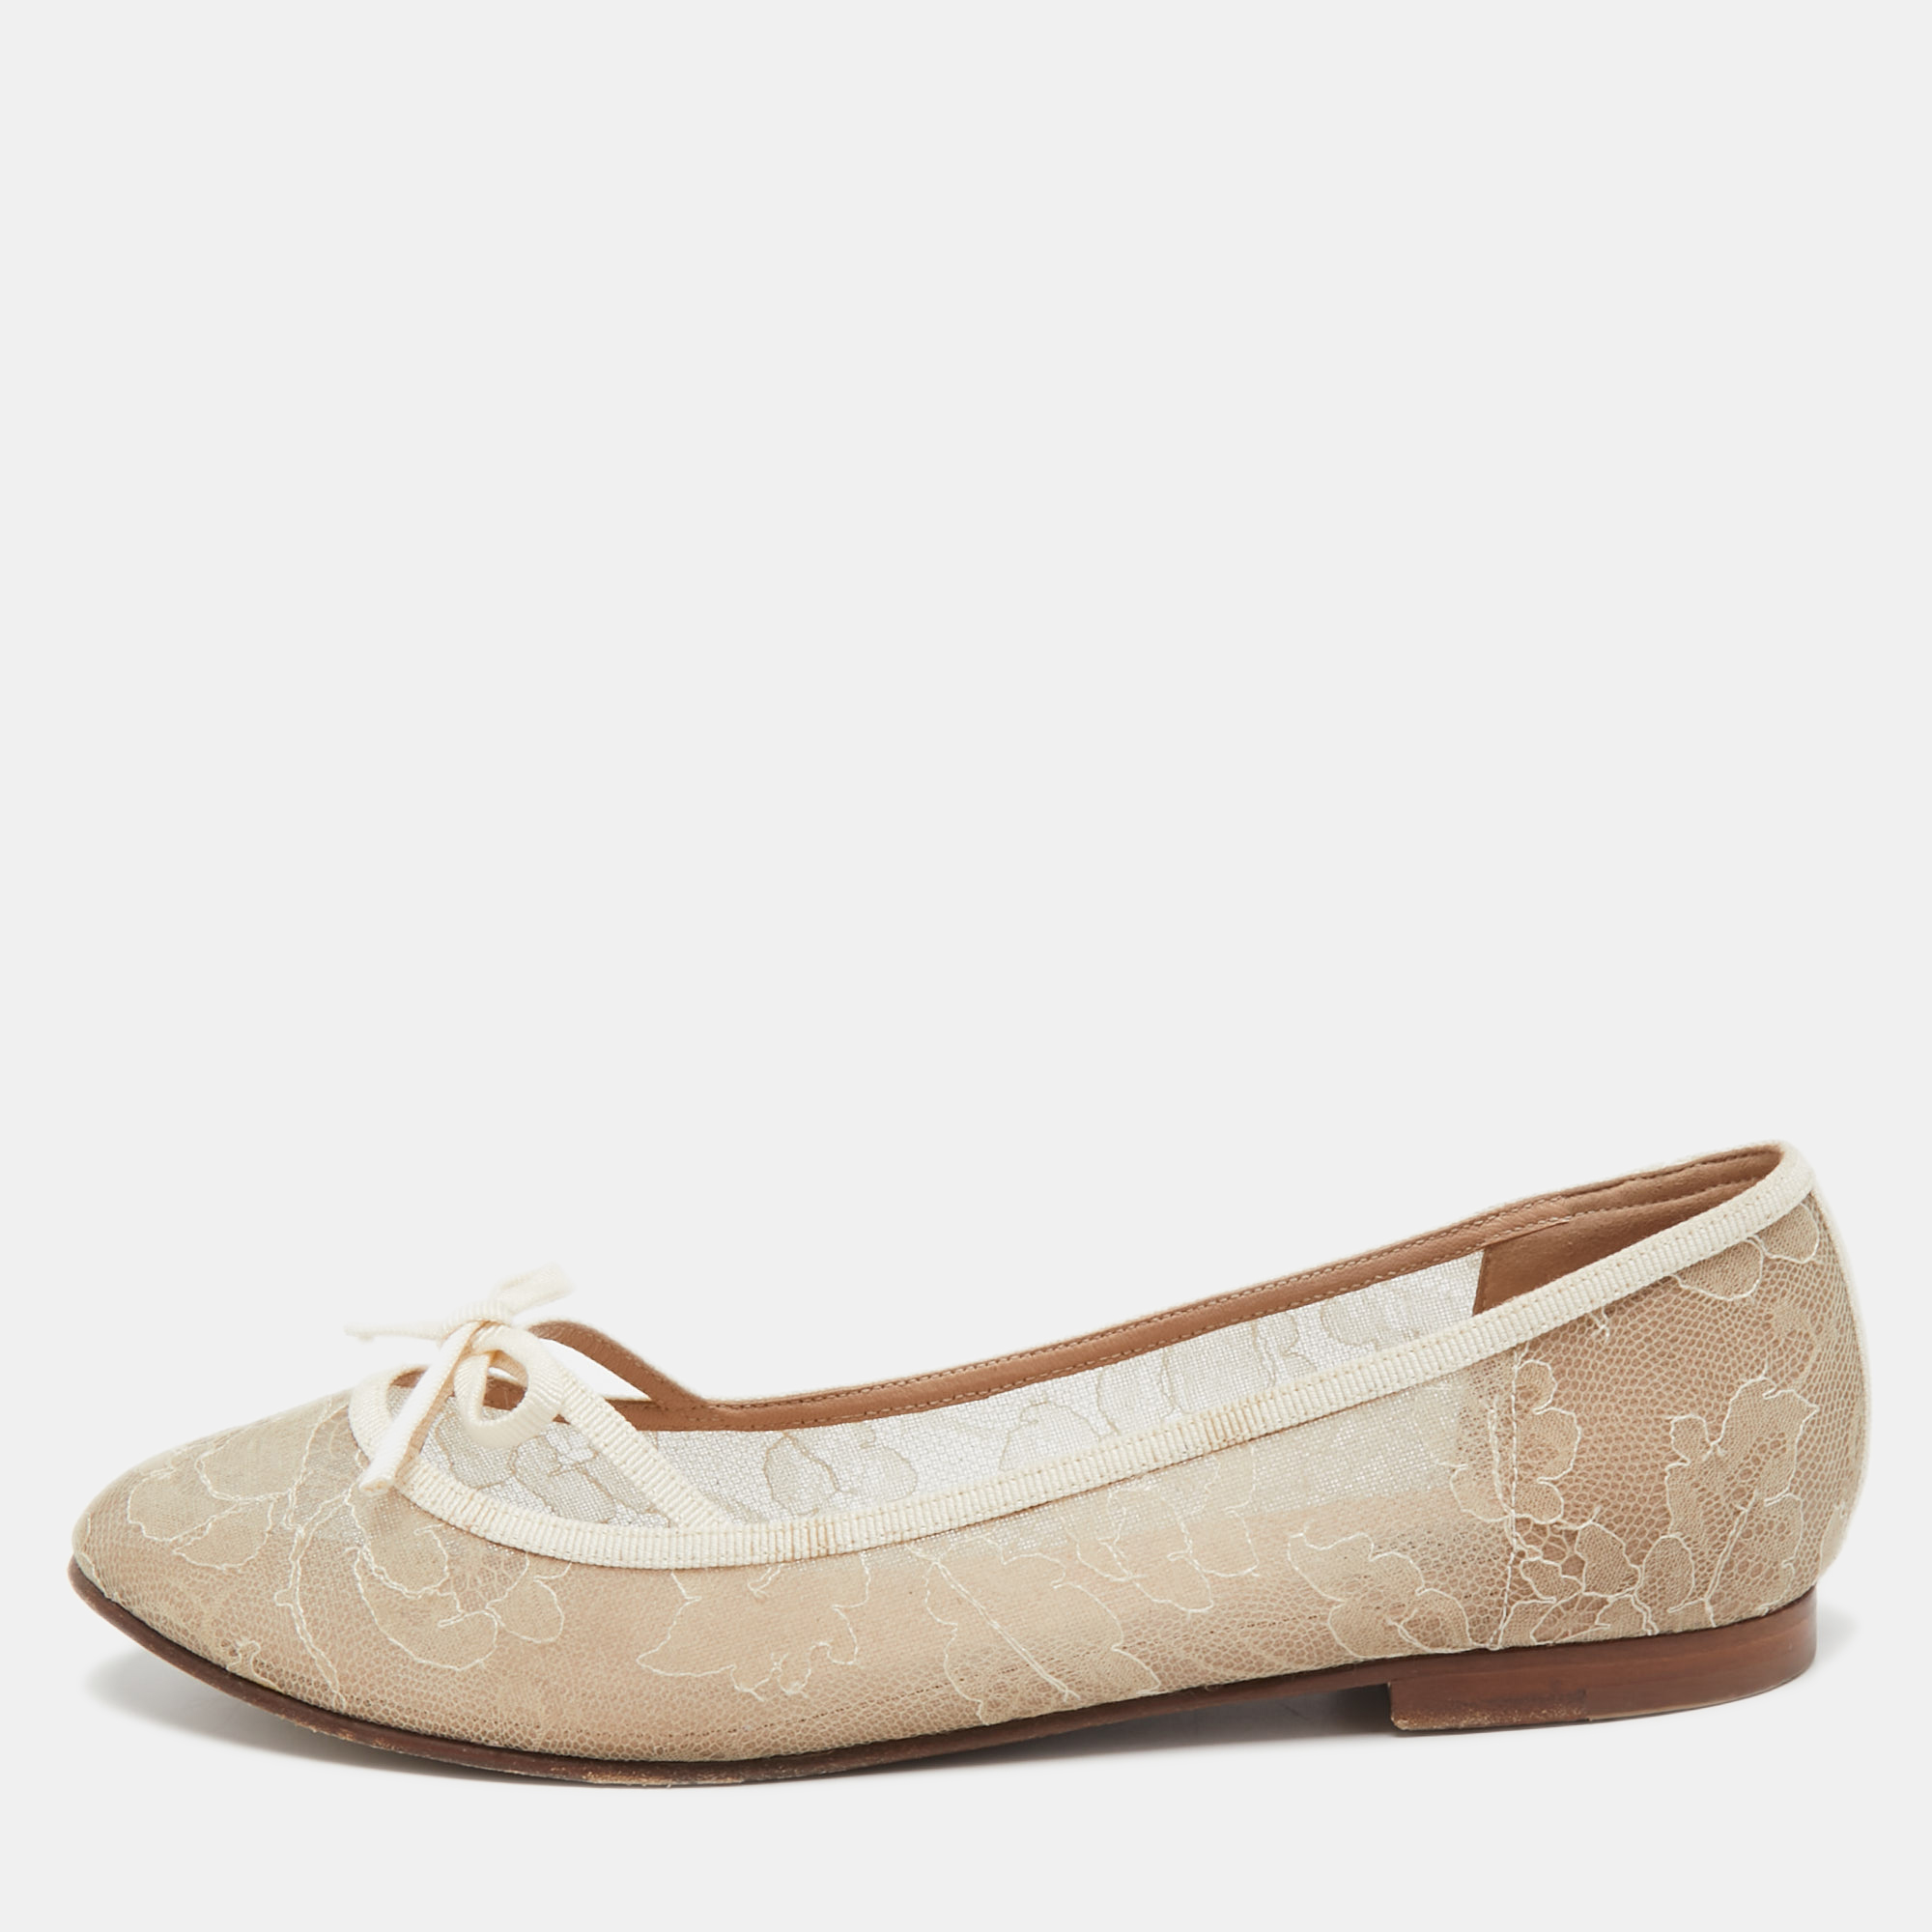 Pre-owned Valentino Garavani Beige Lace And Leather Ballet Flats Size 38.5